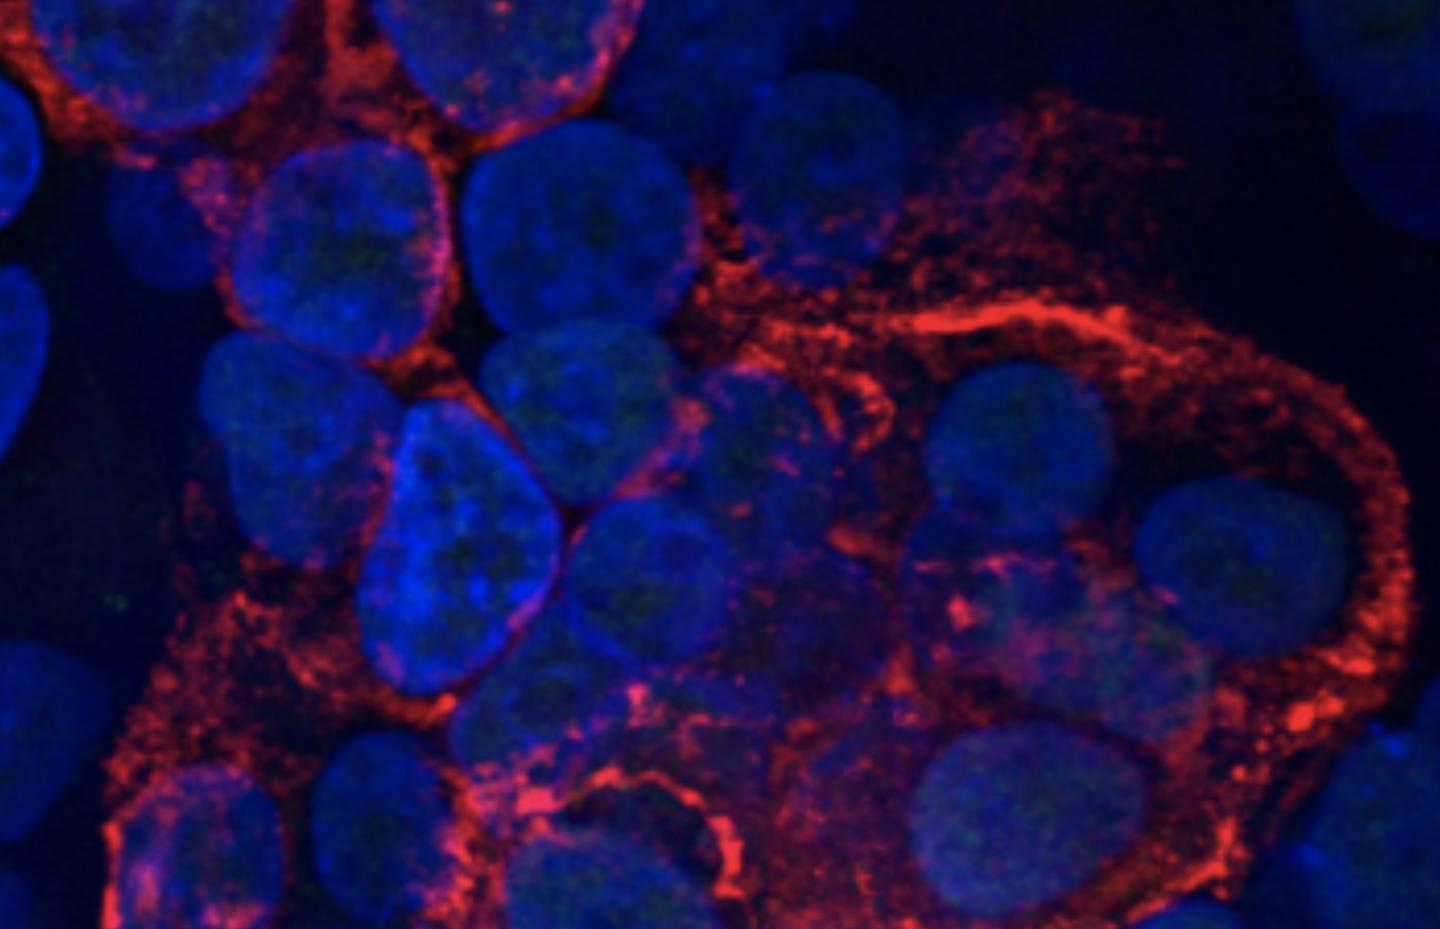 Human lung cells (blue) infected with SARS-CoV-2 (red). Courtesy of Hekman, et al.